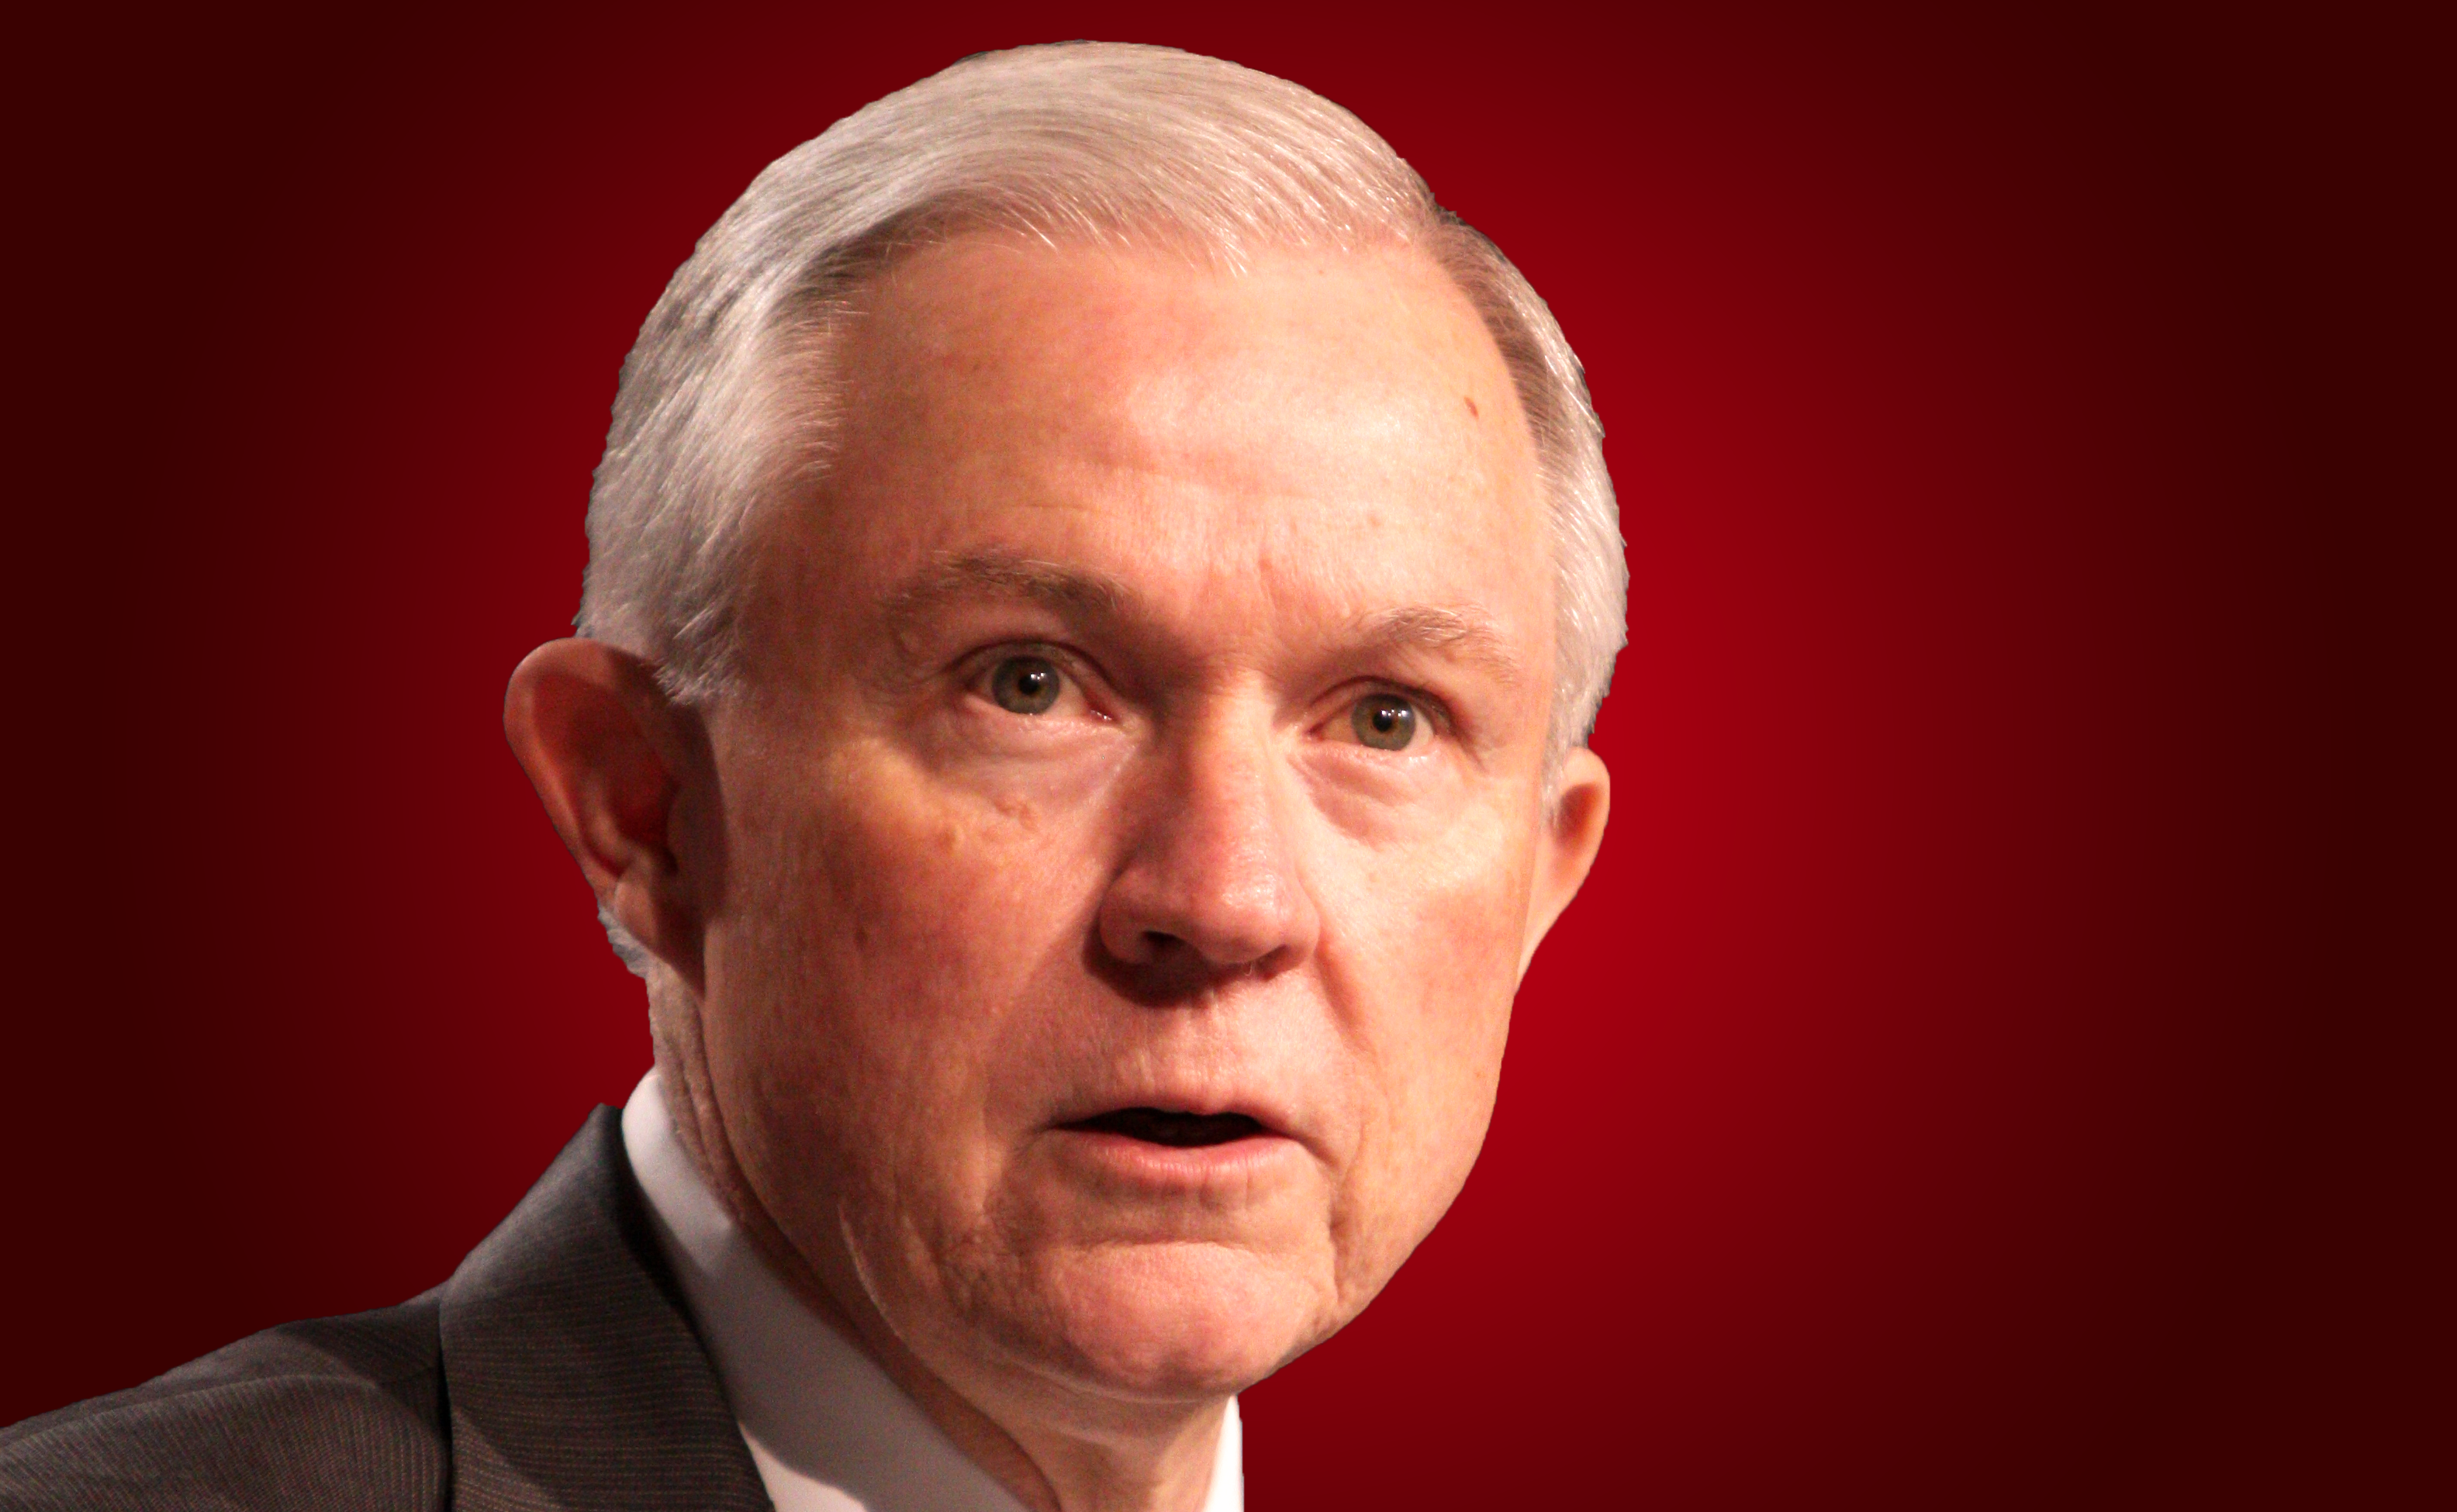 Brief Argues Attorney General Lacks Impartiality Necessary to Decide Immigration Cases